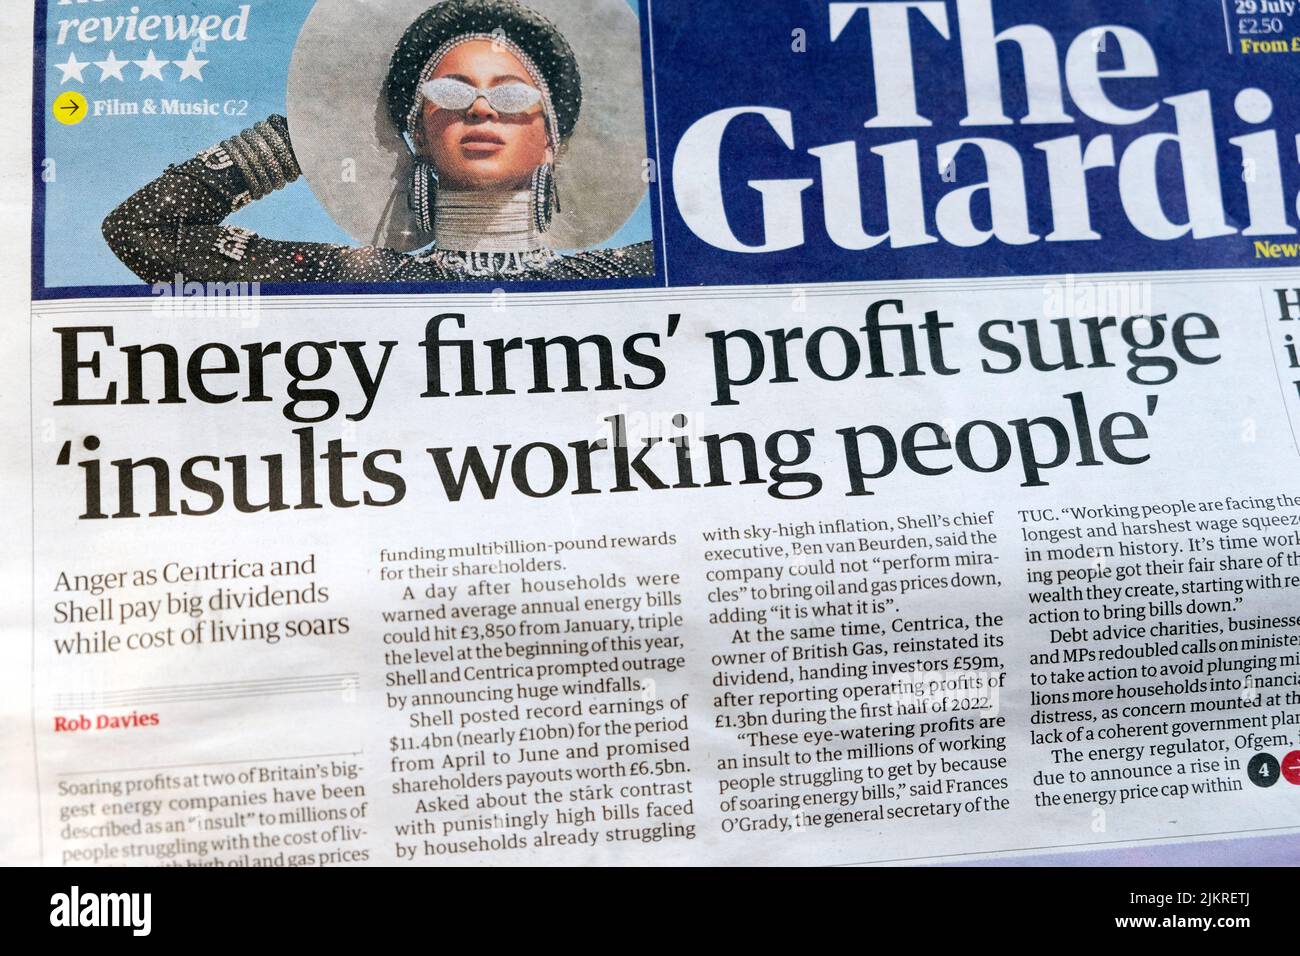 Energy firms' profit surge 'insults working people' The Guardian newspaper headline cost of living crisis  on 29 July 2022 in London UK Great Britain Stock Photo